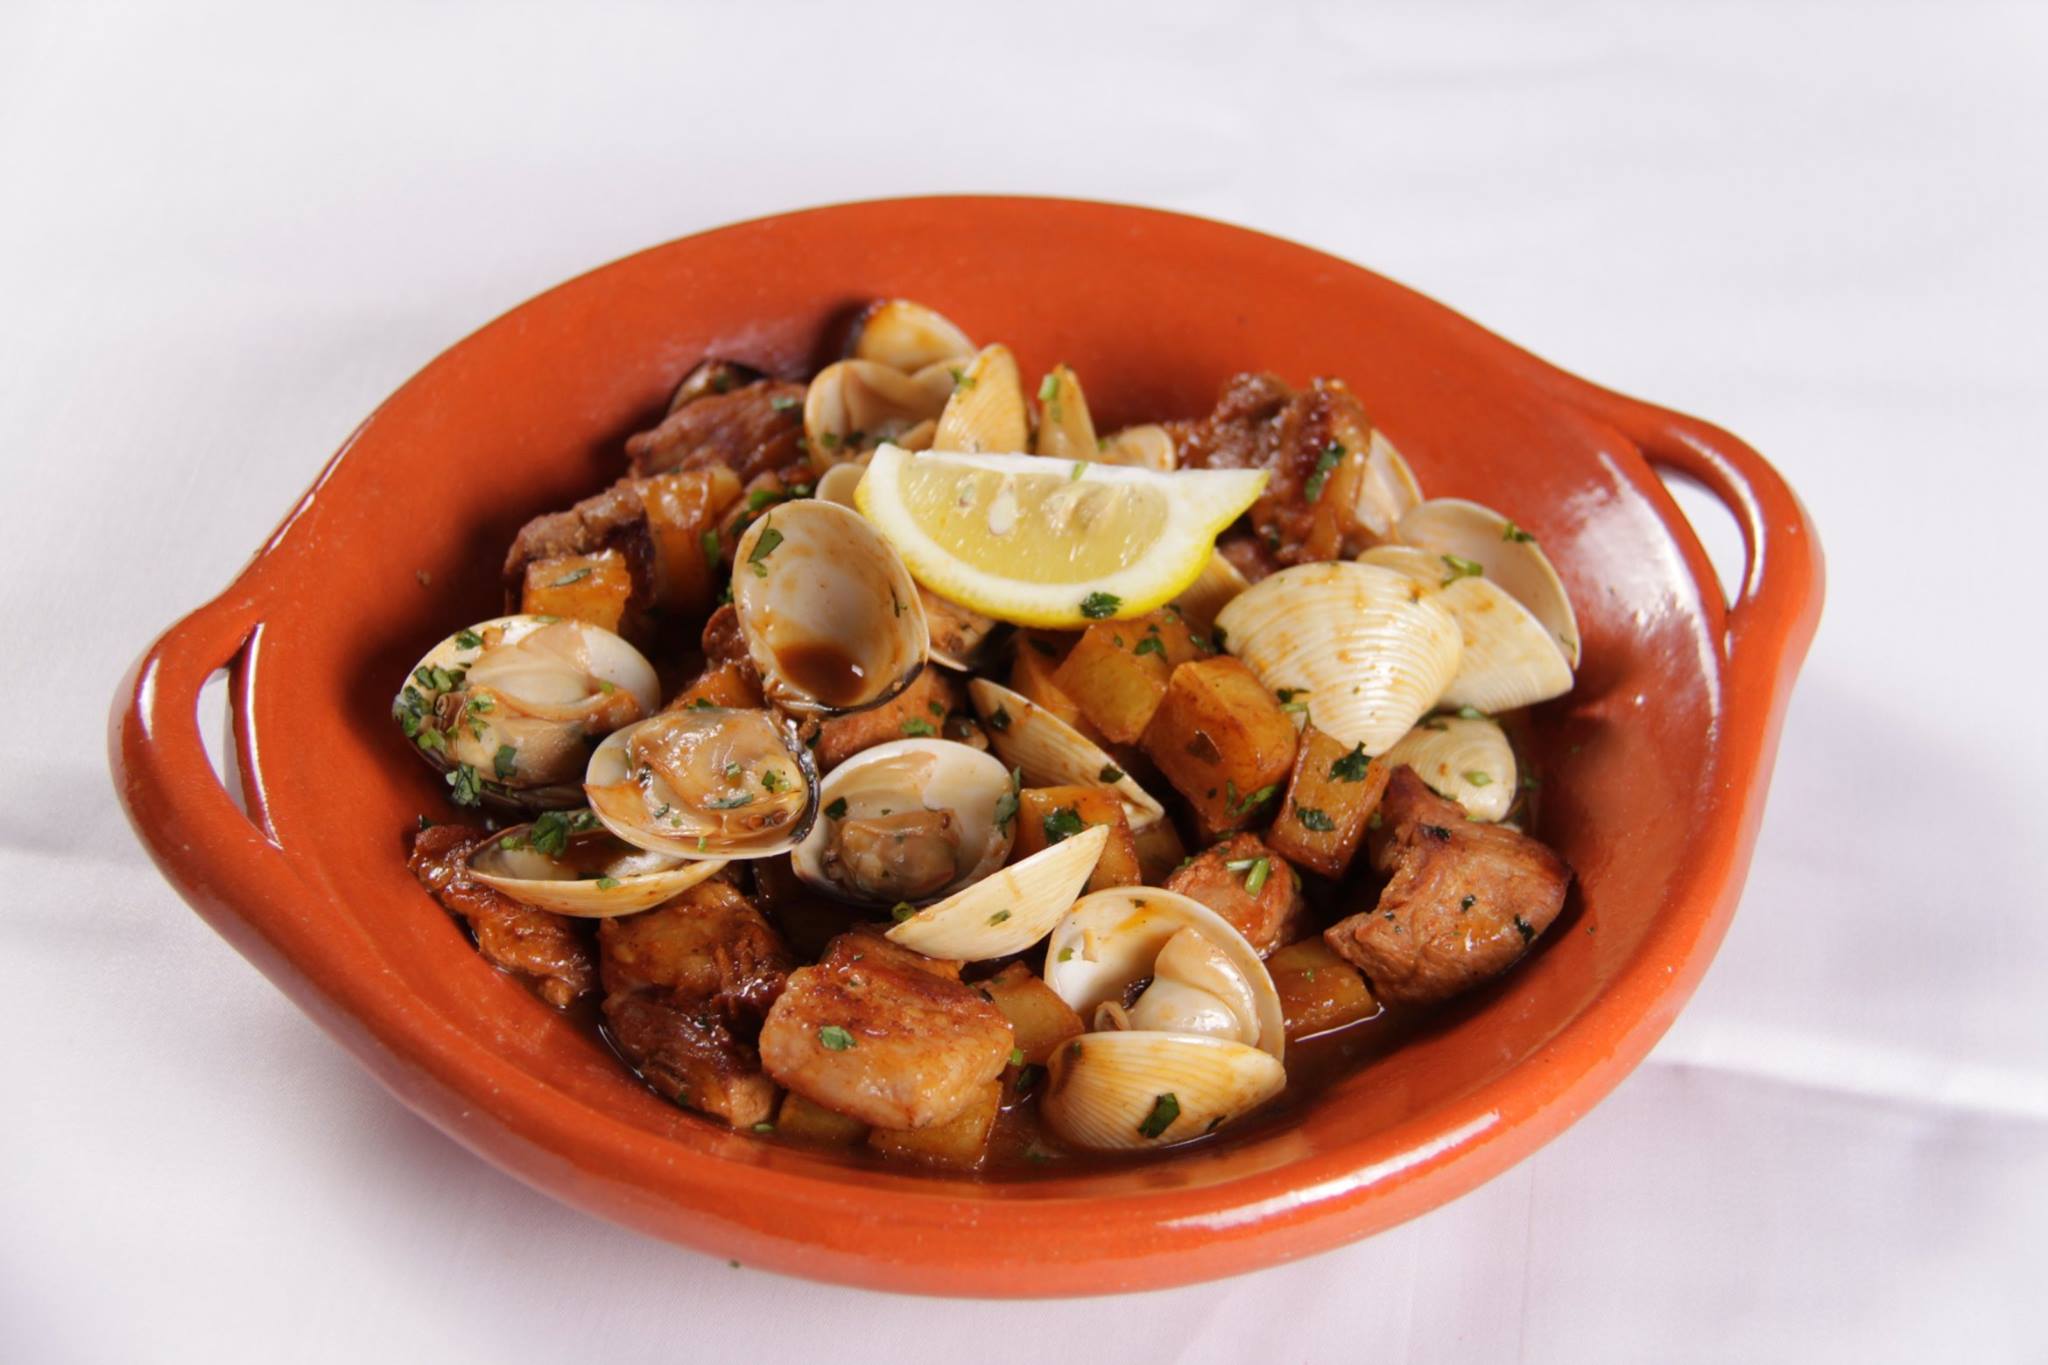 Flamingo: Fried pork and potatoes with clams in white wine sauce